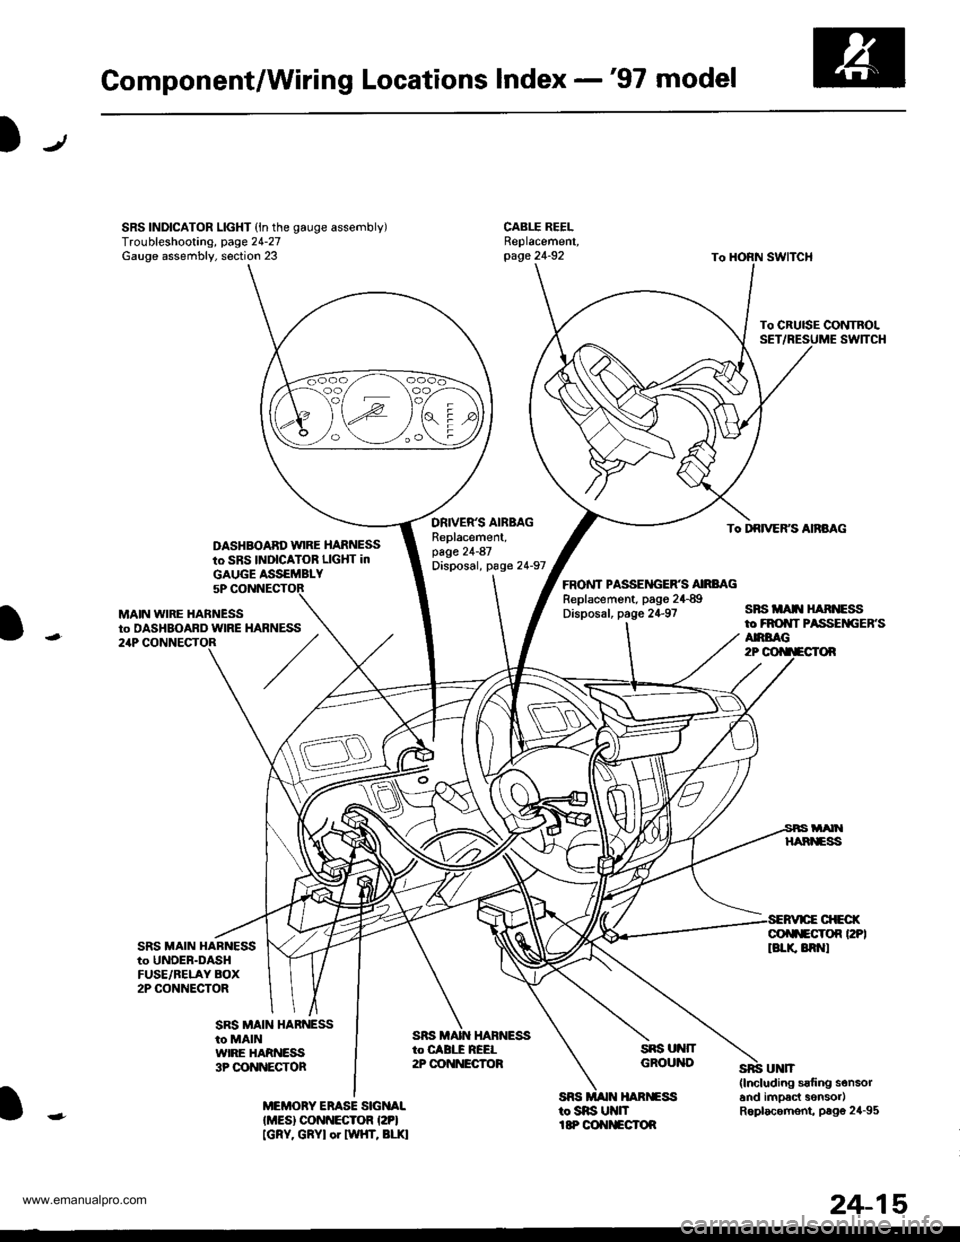 HONDA CR-V 1999 RD1-RD3 / 1.G User Guide 
Component/Wiring Locations Index -97 model
SRS INDICATOR LIGHT (ln the gauge assembly)Troubleshooting, page 24-27Gauge assembly, section 23
DASHBOABD w|RE HARNESS
to SBS INDICATOR LIGHT in
DRIVERS 